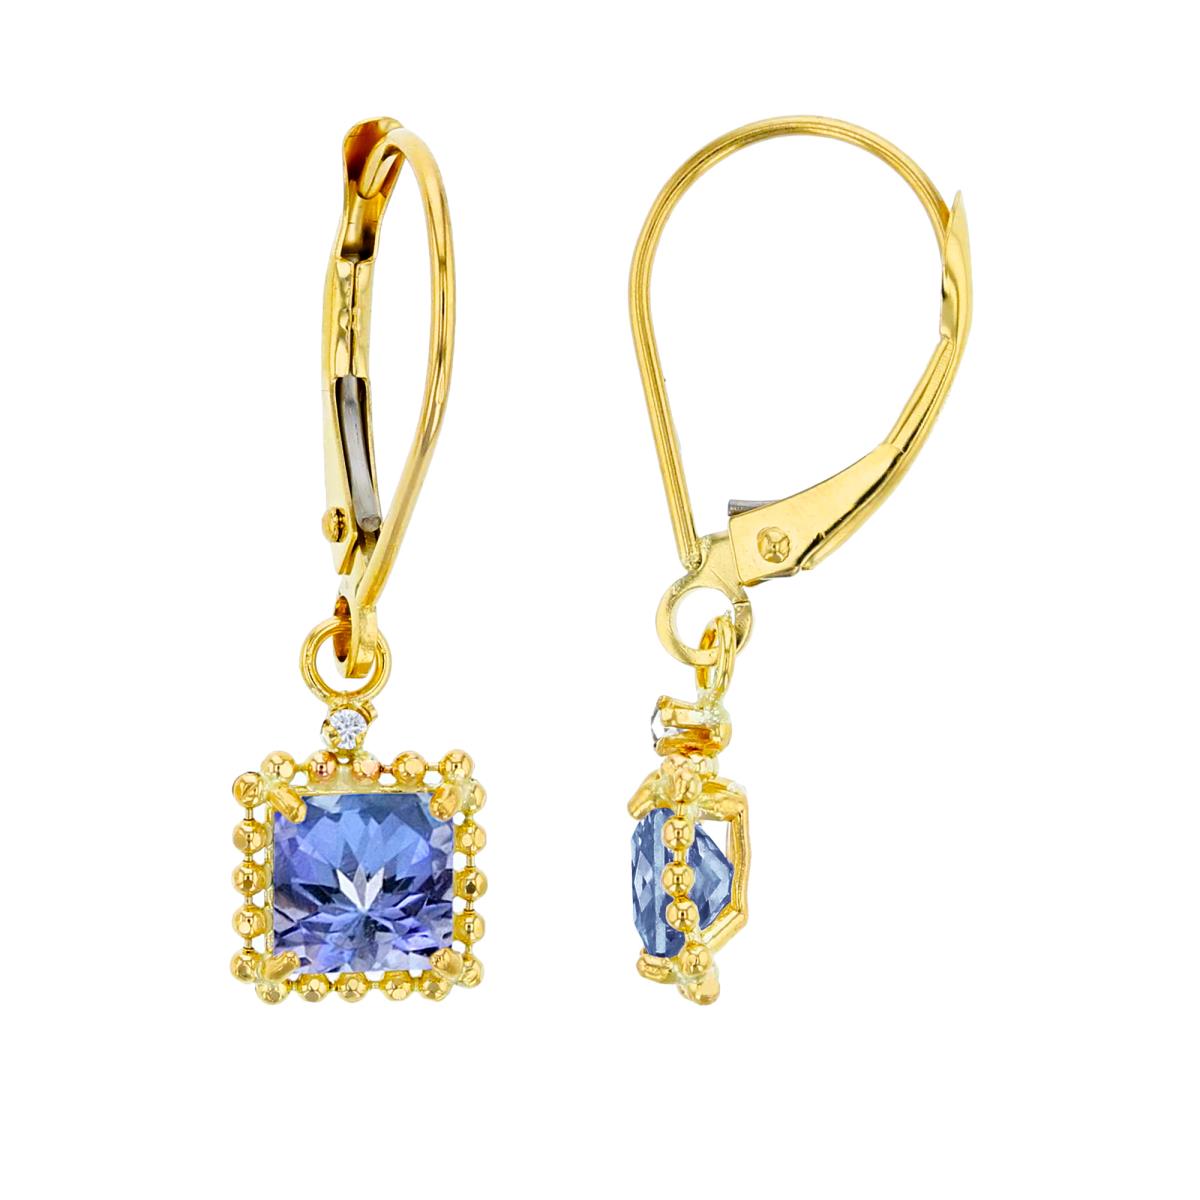 10K Yellow Gold 1.25mm Rd Created White Sapphire & 5mm Sq Tanzanite Bead Frame Drop Lever-Back Earring